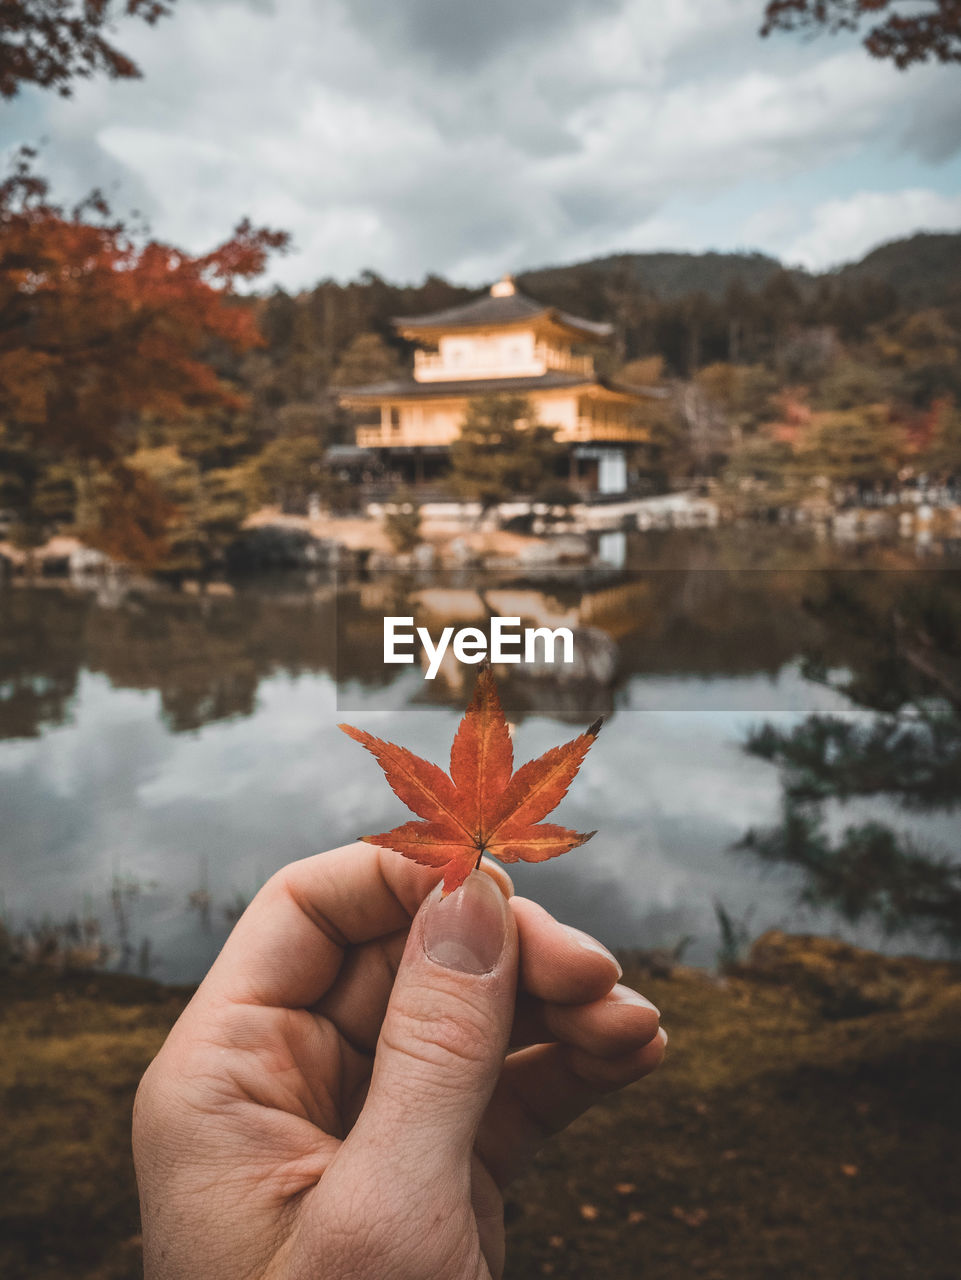 PERSON HOLDING MAPLE LEAF DURING AUTUMN